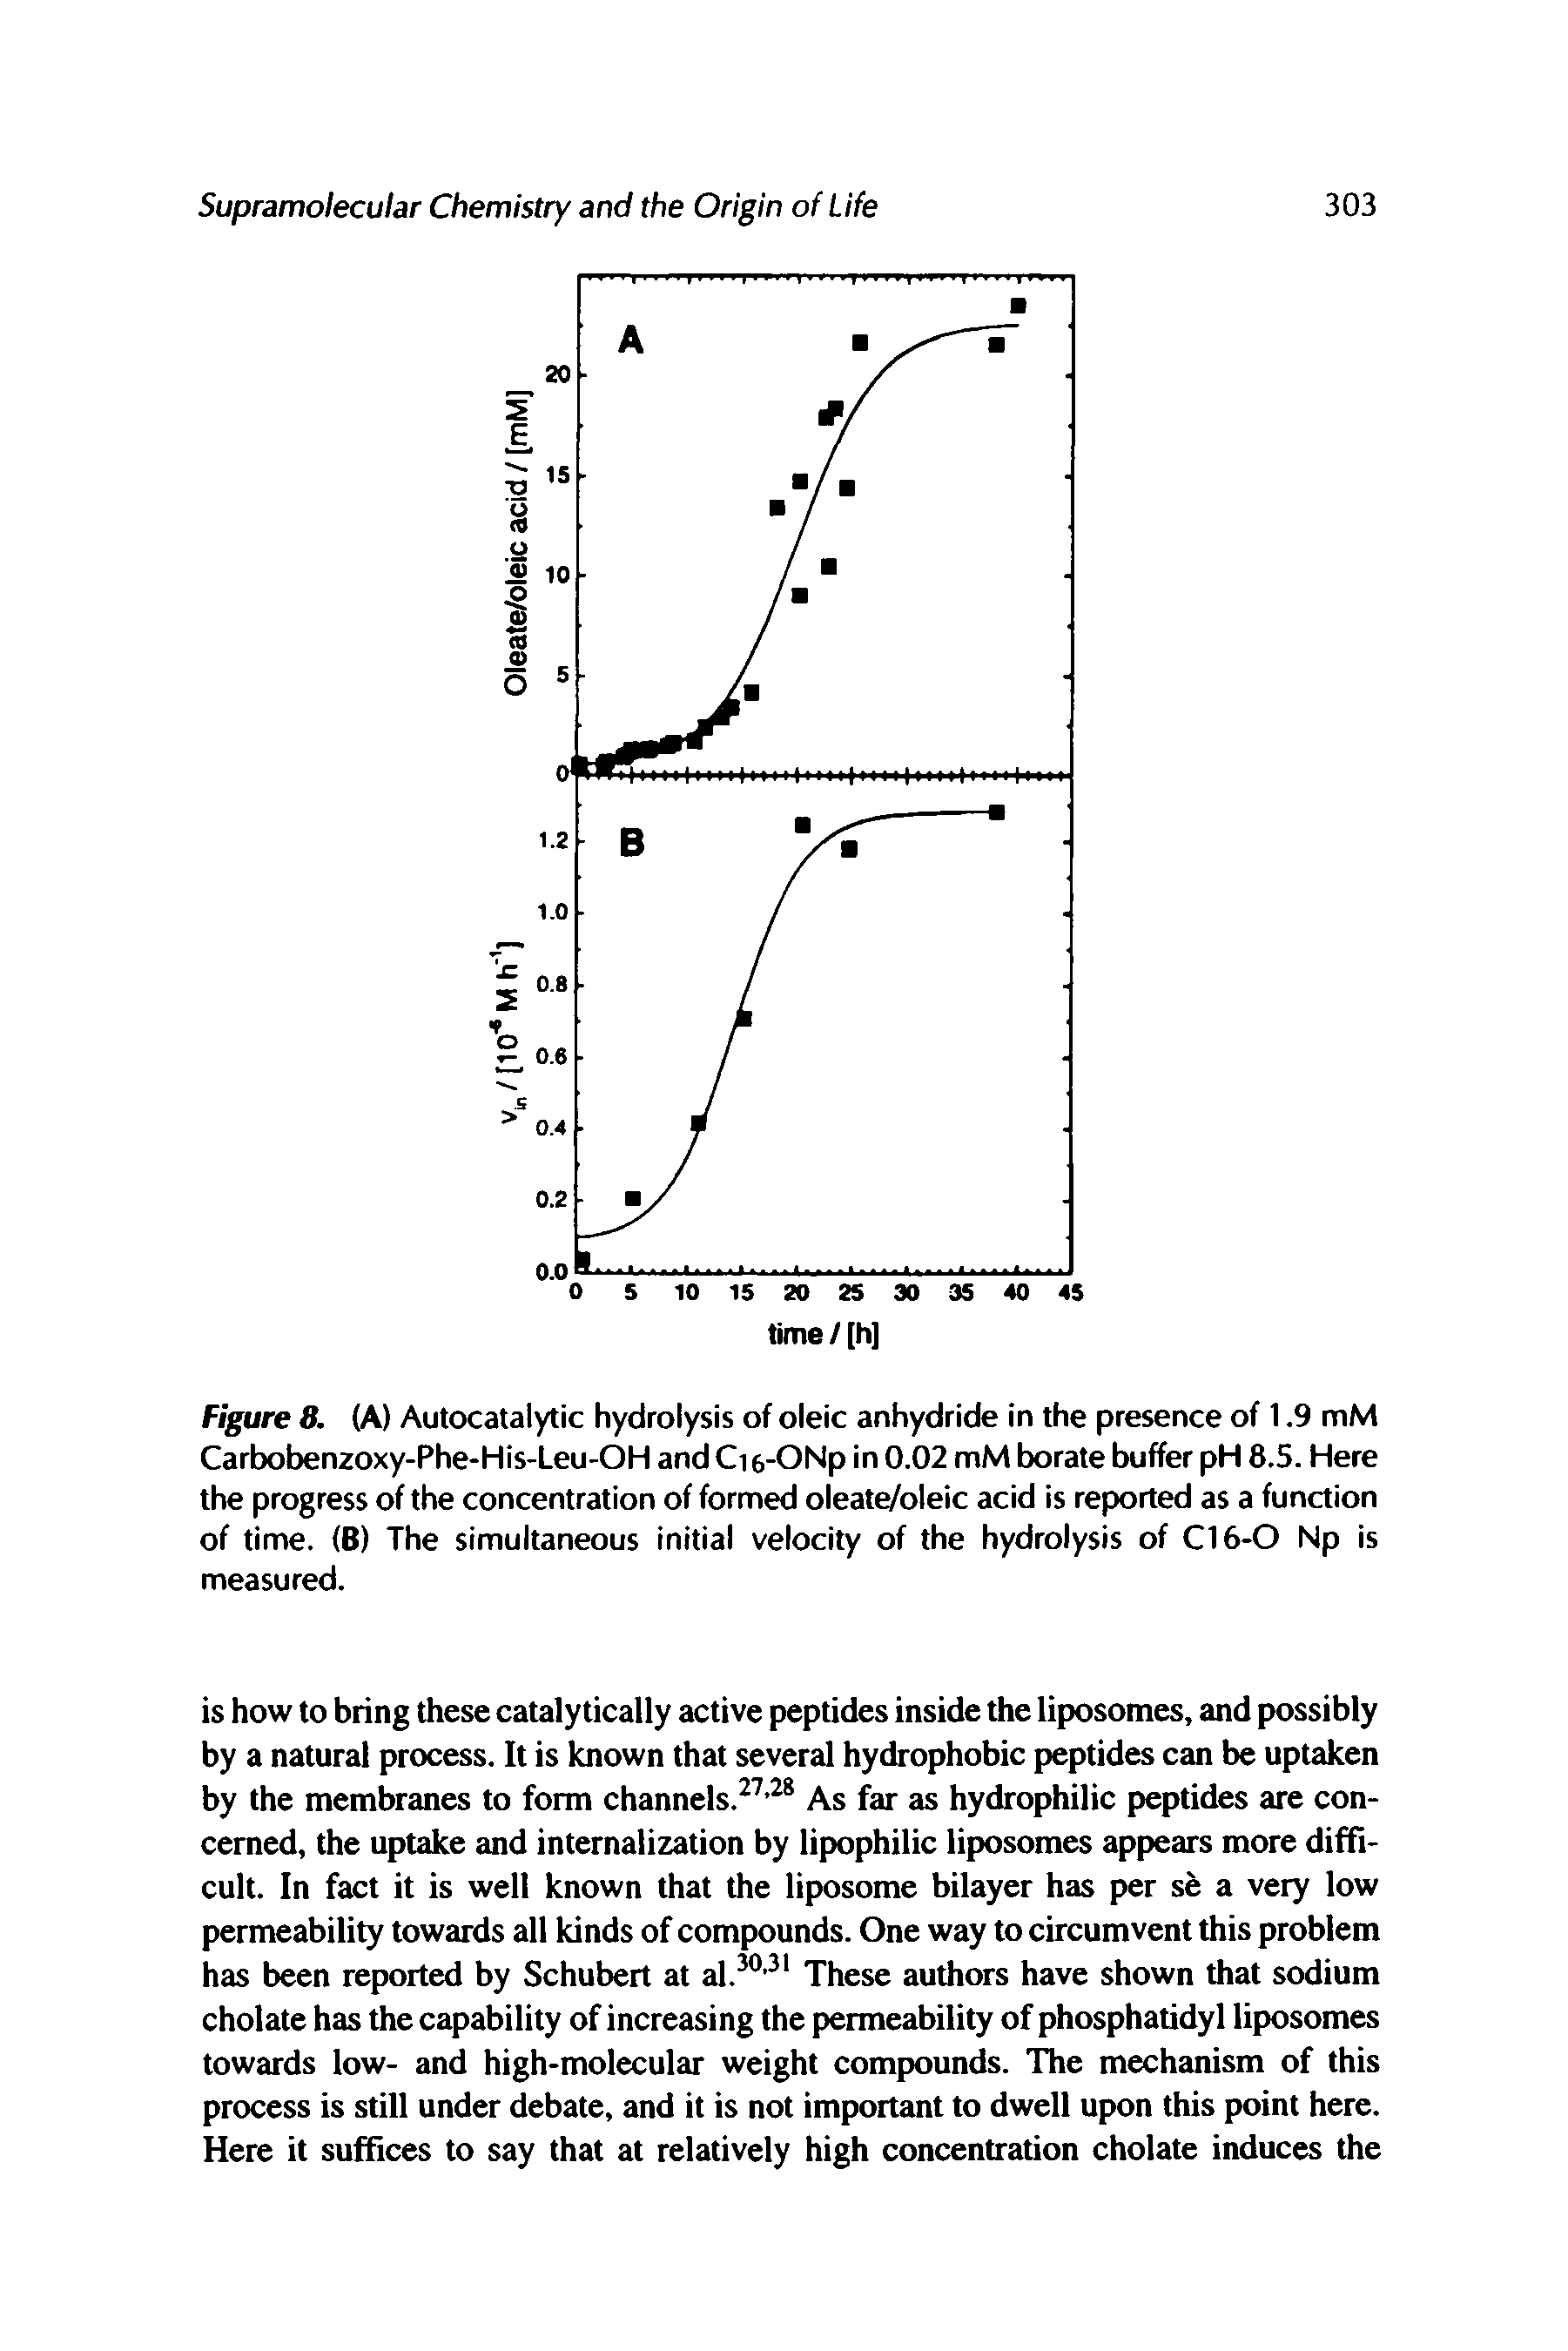 Figure 8. (A) Autocatalytic hydrolysis of oleic anhydride in the presence of 1.9 mM Carbobenzoxy-Phe-His-Leu-OH and Ci e-ONp in 0.02 mM borate buffer pH 8.5. Here the progress of the concentration of formed oleate/oleic acid is reported as a function of time. (B) The simultaneous initial velocity of the hydrolysis of Cl 6-0 Np is measured.